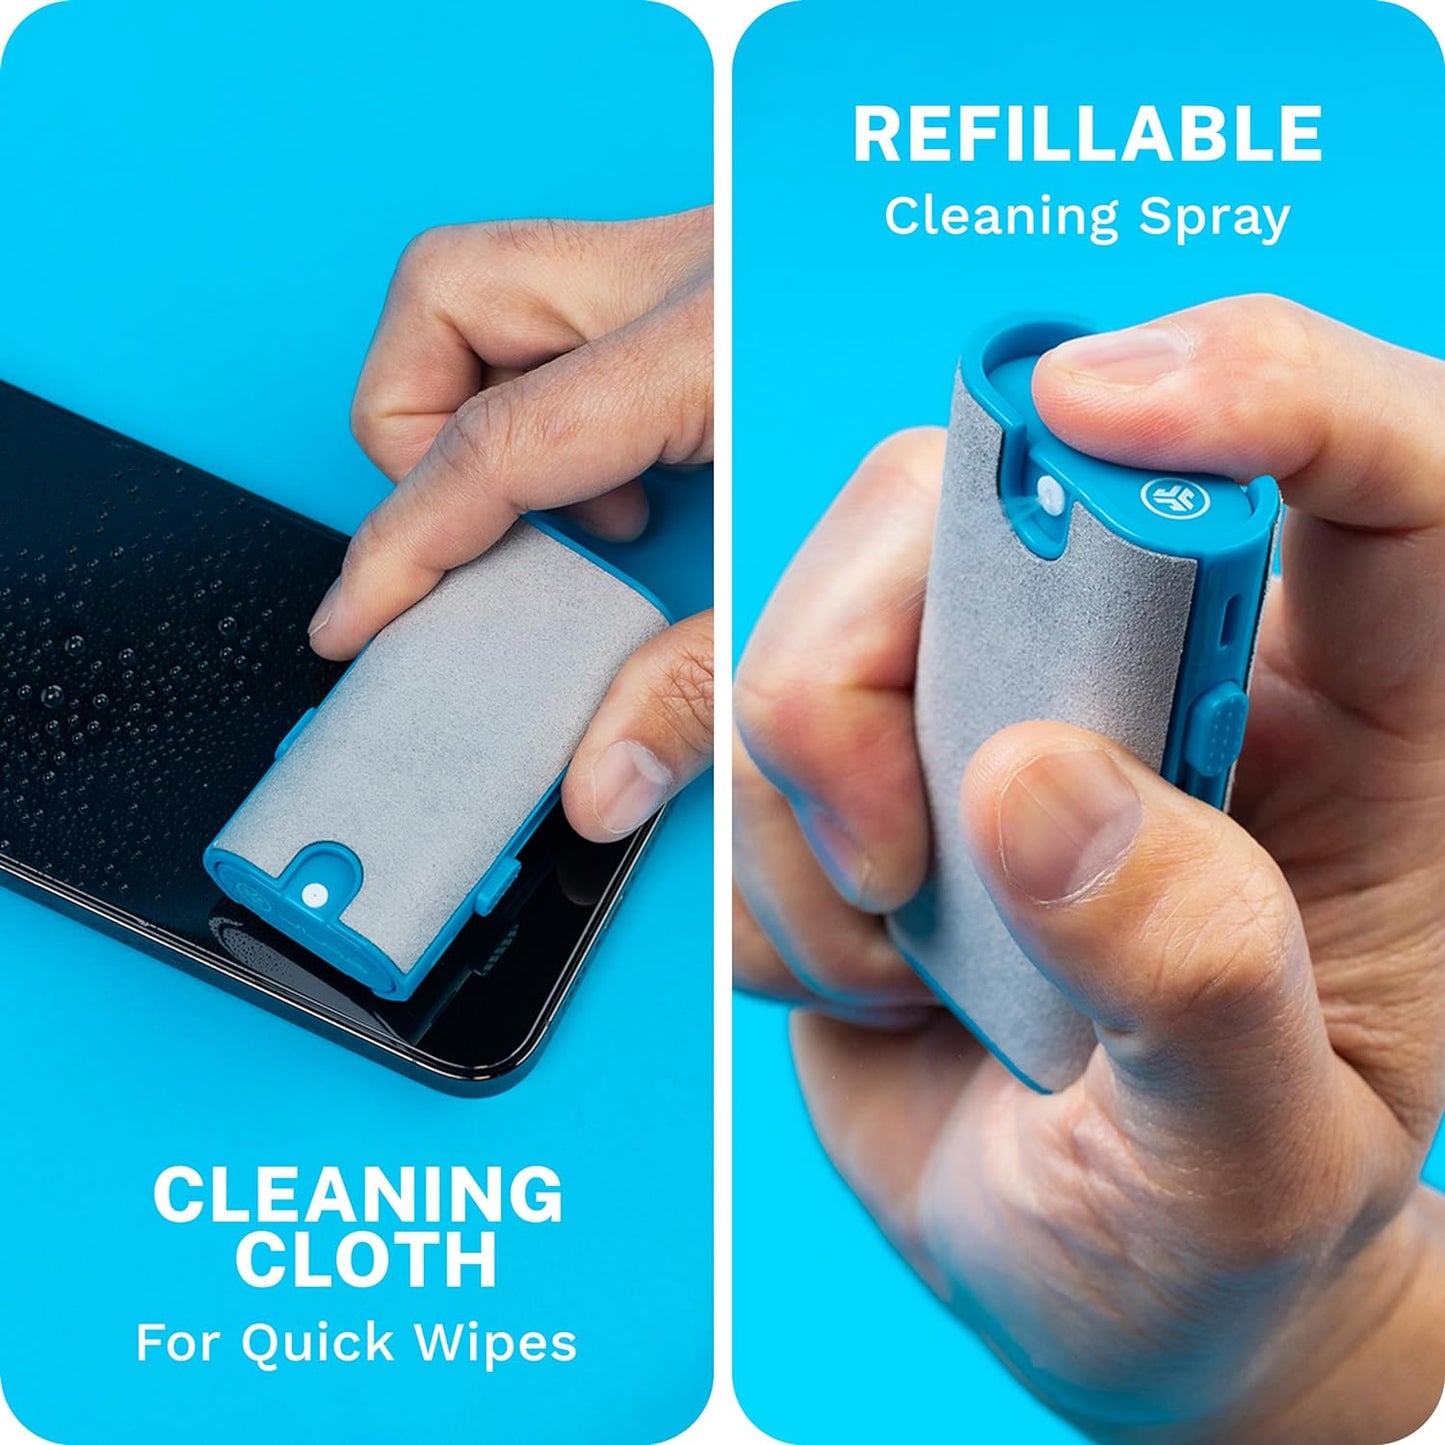 JLab Multifunctional Cleaning Kit Suitable for Headphones、Earplugs、Keyboard、Mouse/Mouse、Microphone、Laptop、Tablet Pc、Mobile Phone(iPhone Or Android)、Smart Watches and Electronic Products,100% Recyclable Packaging